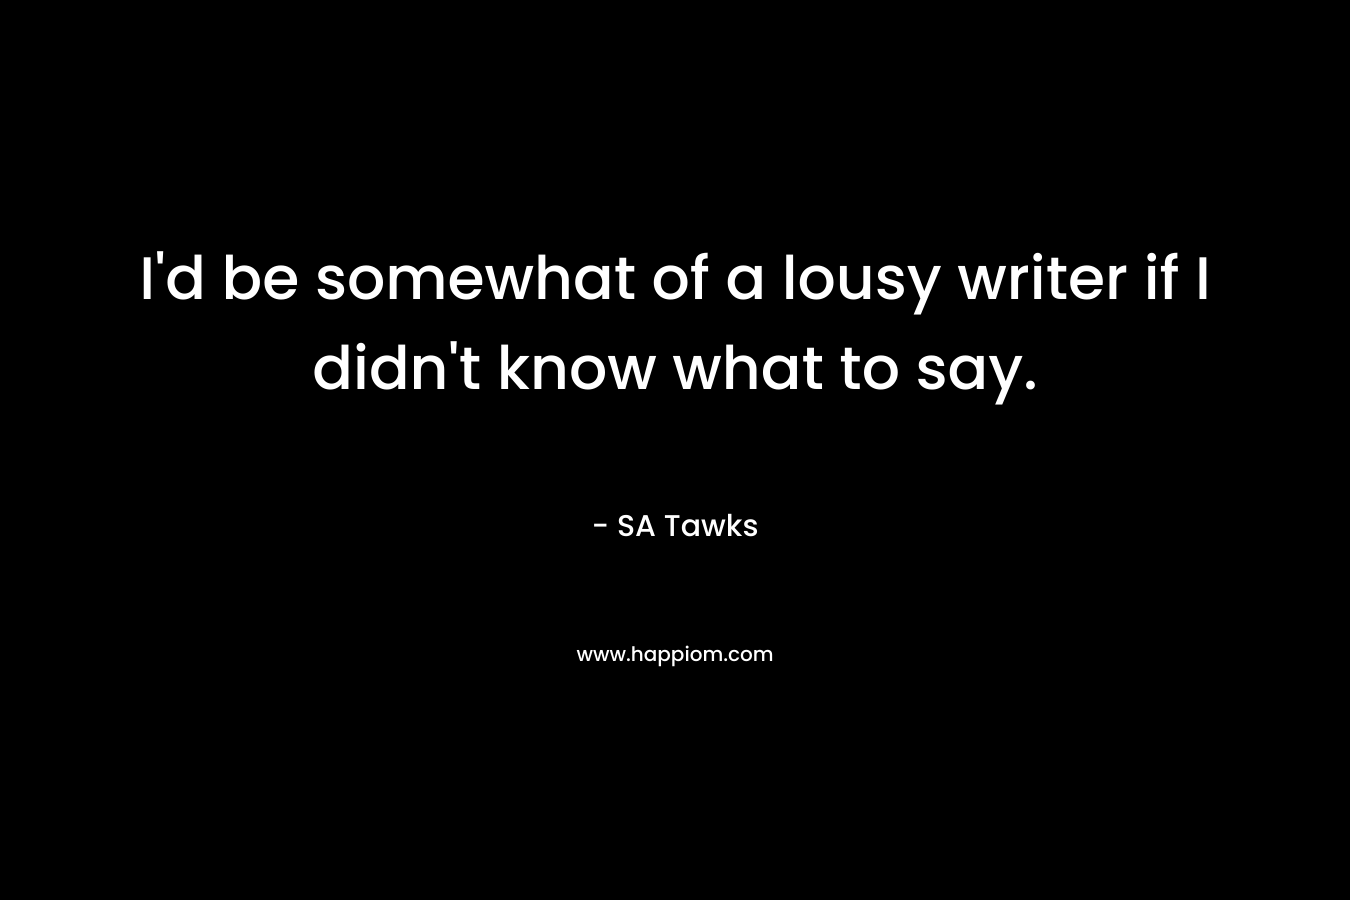 I’d be somewhat of a lousy writer if I didn’t know what to say. – SA Tawks